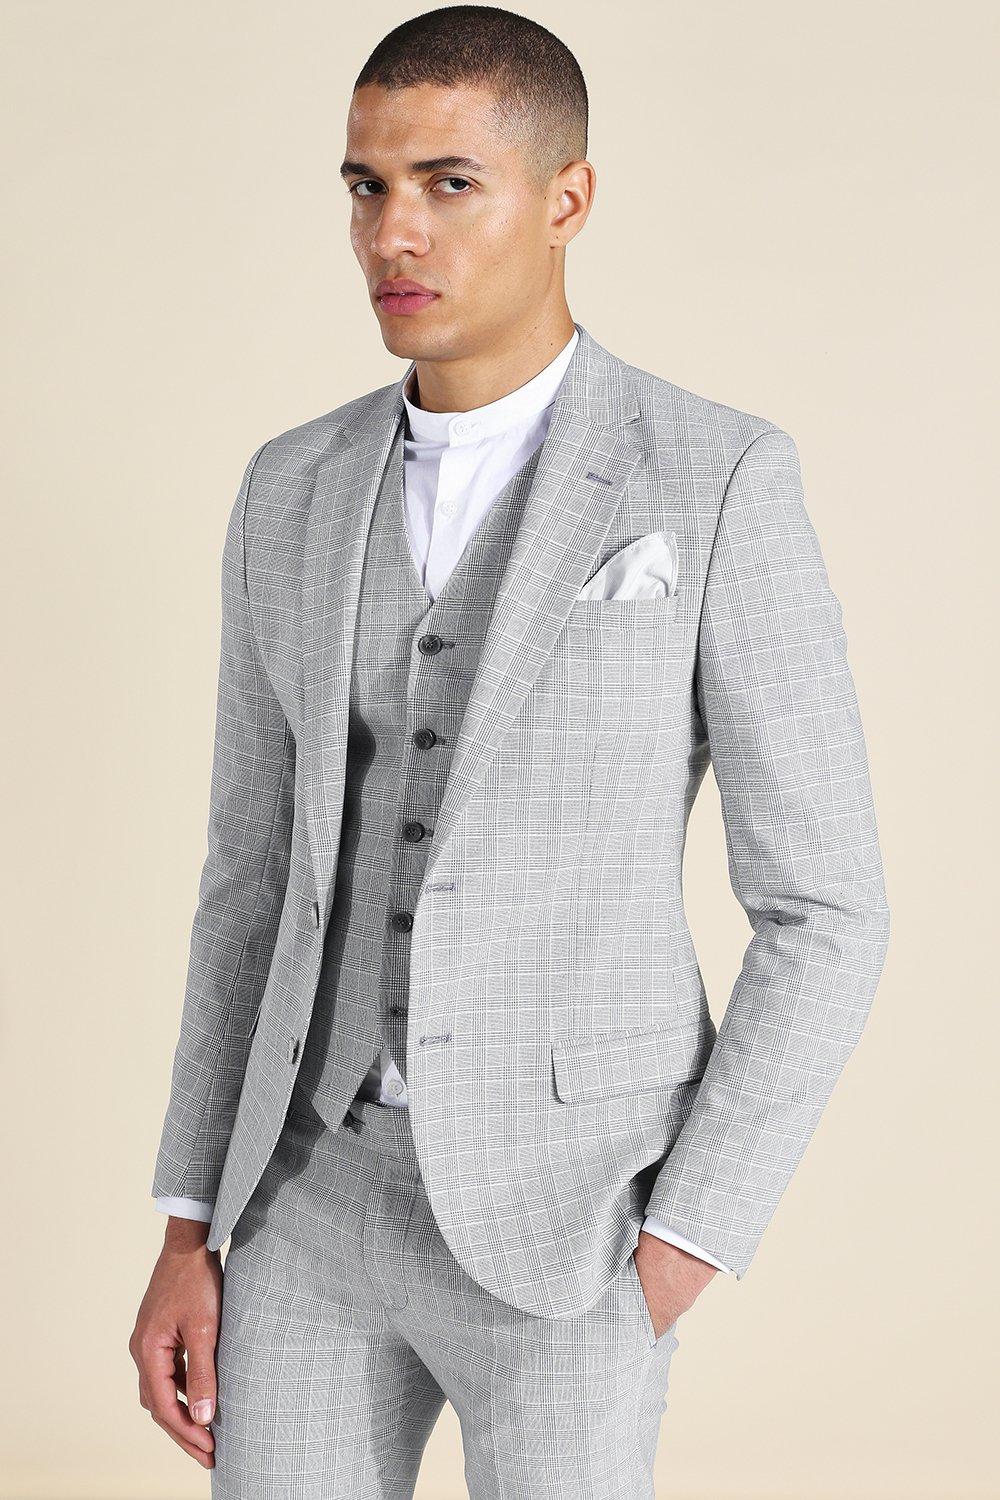 boohooMAN Tall Slim Double Breasted Suit Jacket - Gray - Size 40